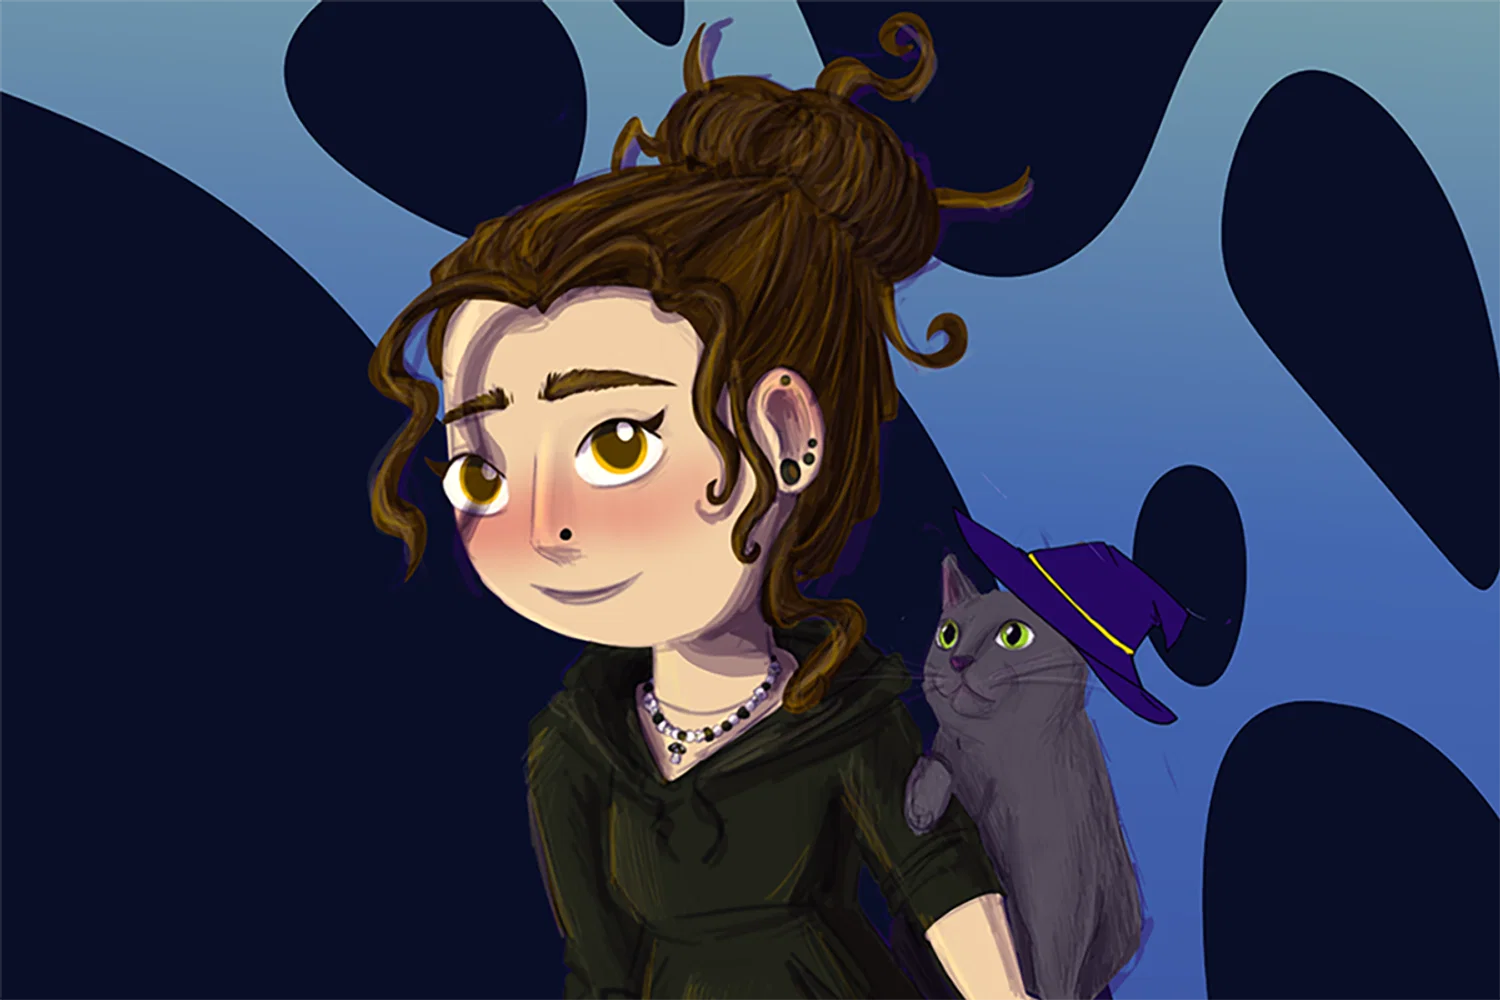 Self portrait of person with curly brown hair pulled up, and brown eyes in a dark gray hoodie, with a light gray cat wearing a purple witch hat, on a dark blue background with light blue lava lamp like shapes